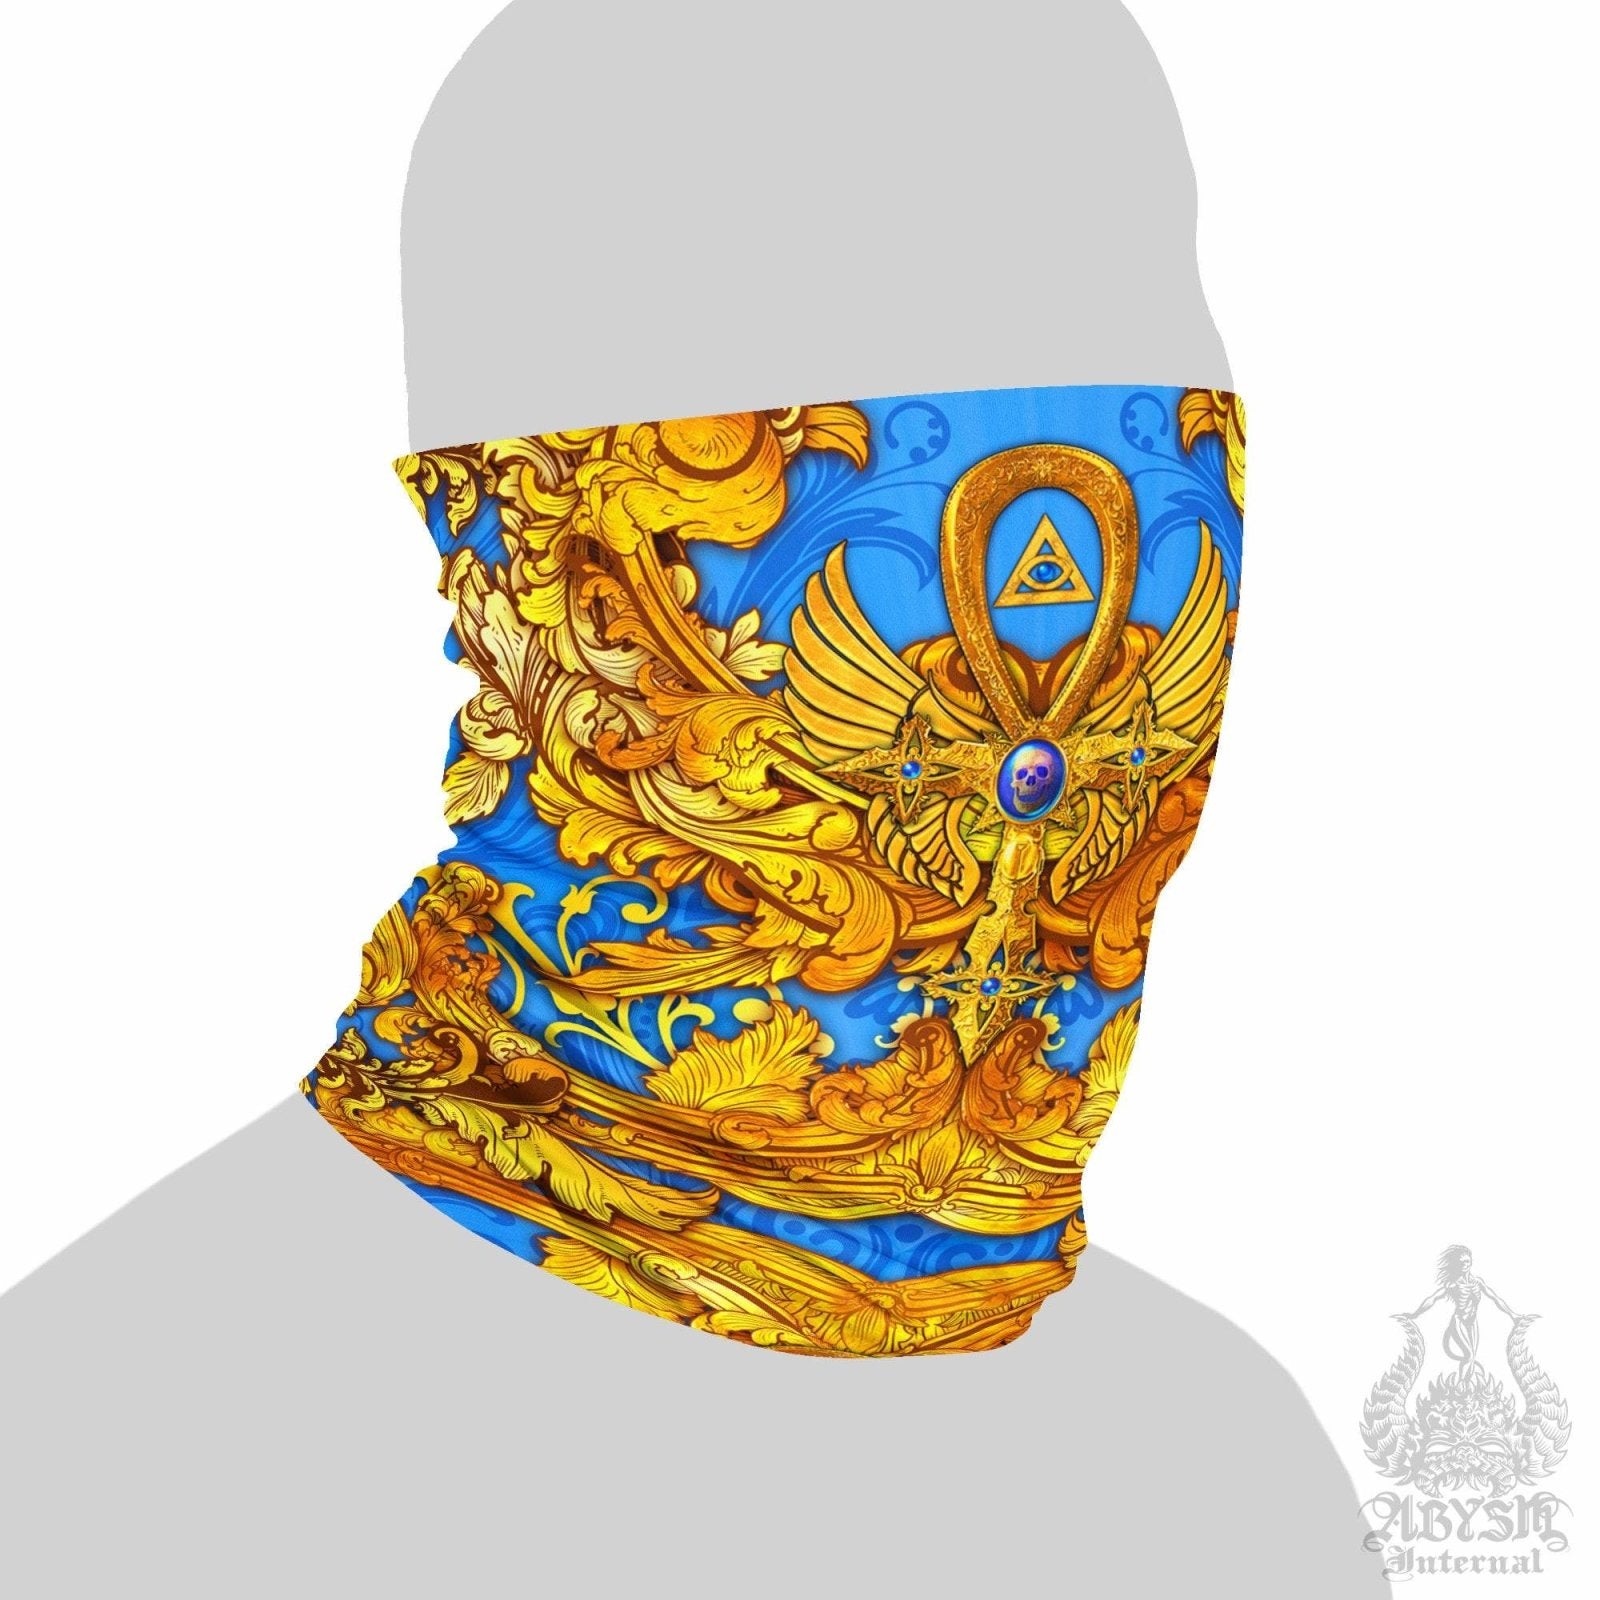 Ankh Neck Gaiter, Face Mask, Head Covering, Egyptian, Colorful Outfit - Gold Ankh Cross, Cyan - Abysm Internal